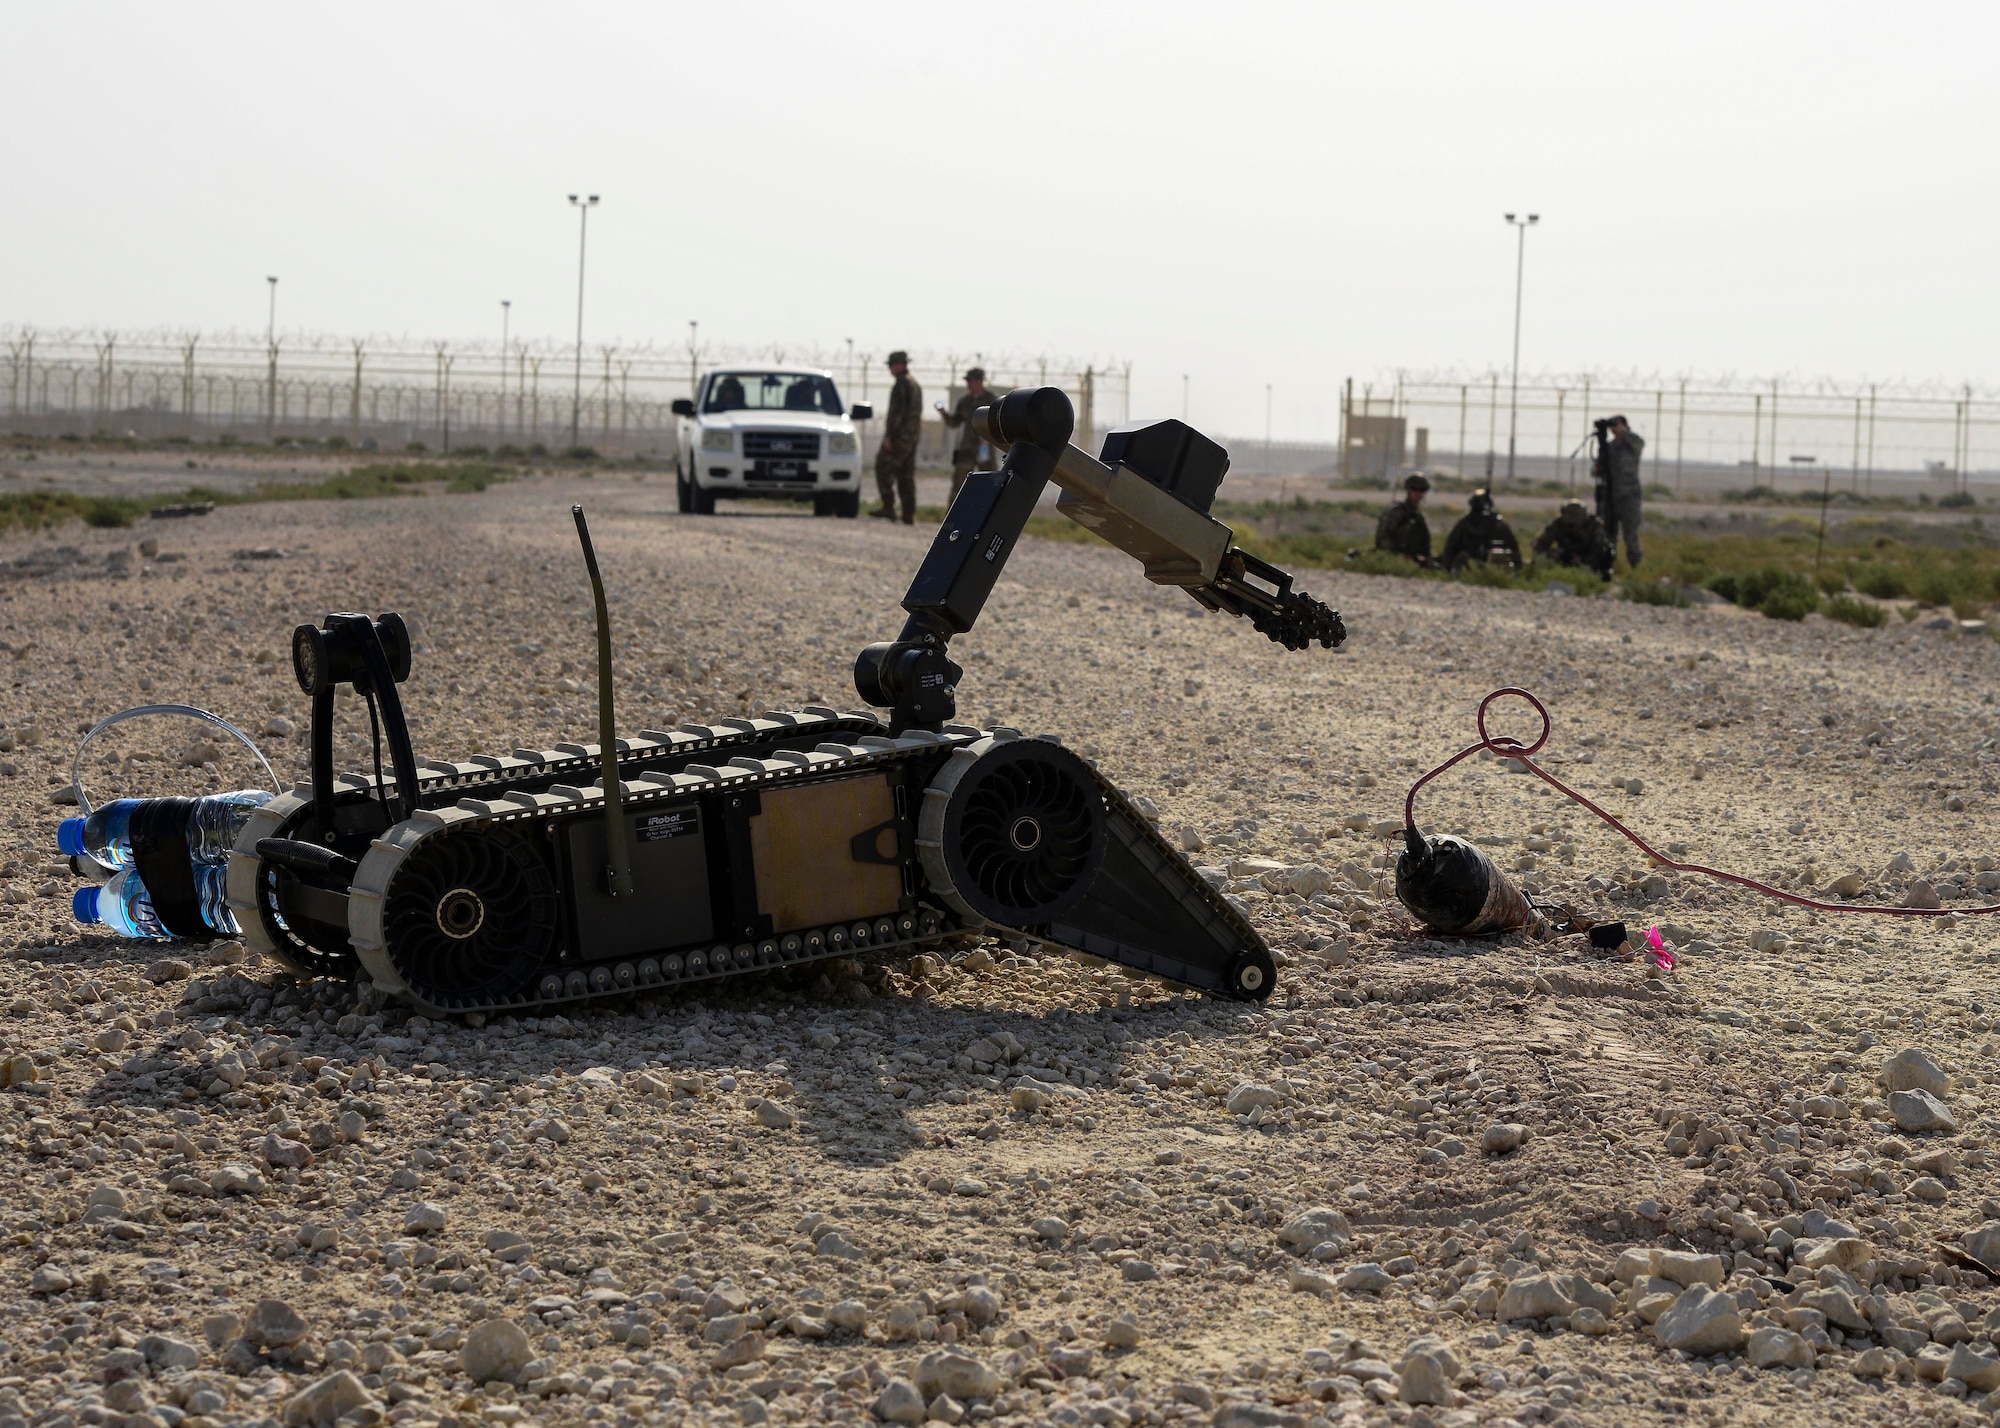 A Packbot 310 robot engages an improvised explosive device during a training exercise May 19, 2016, at Al Udeid Air Base, Qatar. Conducting training at Al Udeid AB is more realistic due to equipment availability and natural environmental situations, such as the hot desert weather. (U.S. Air Force photo/Senior Airman Janelle Patiño/Released)